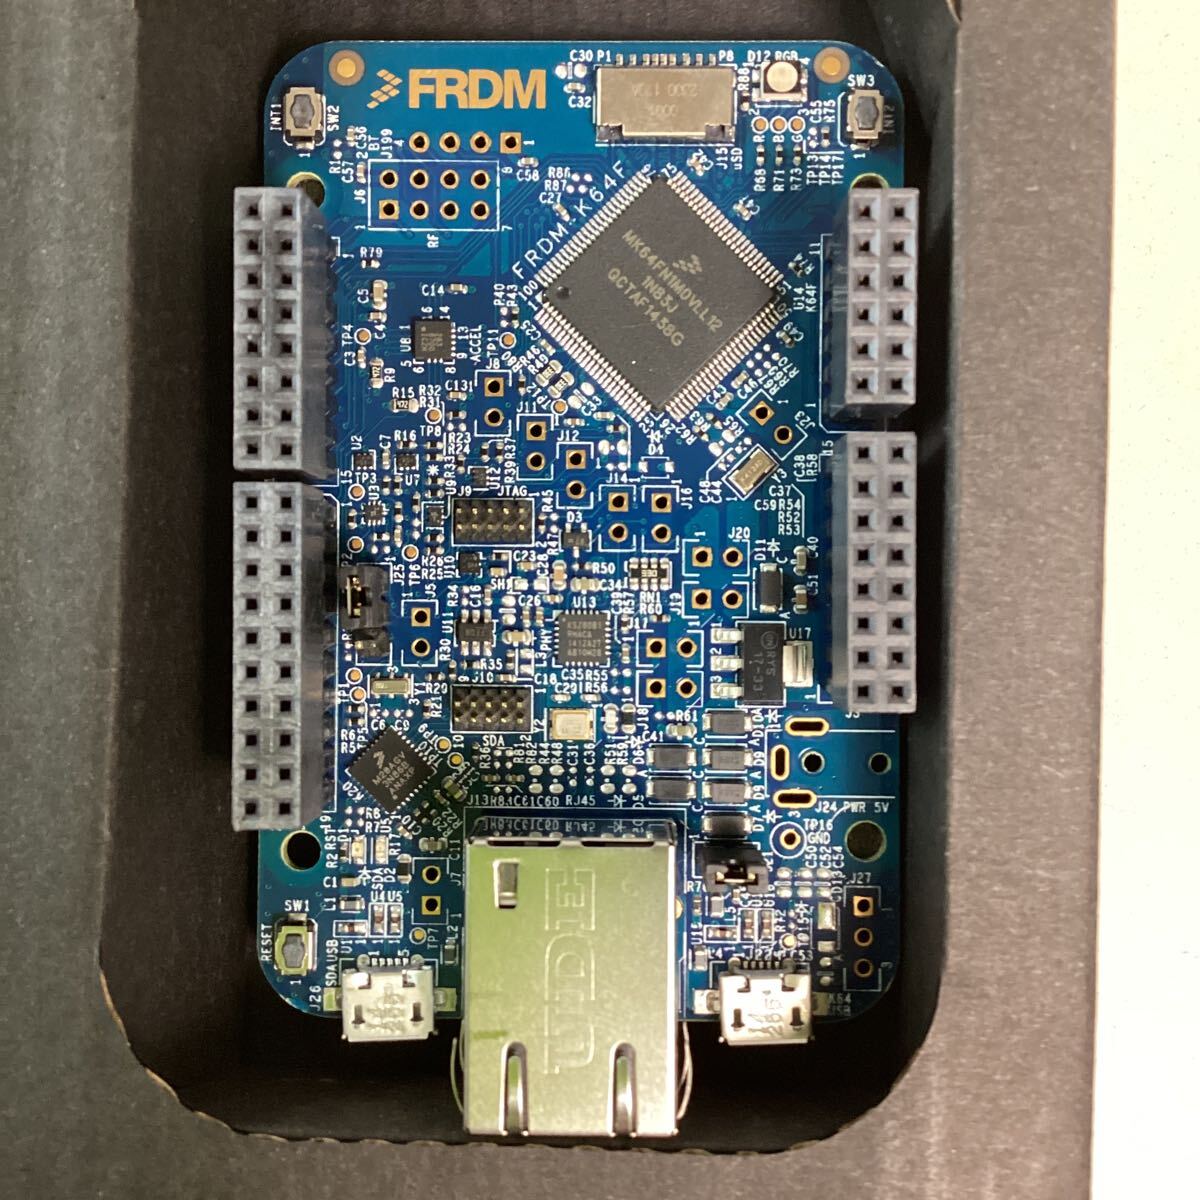 y4262 freescale FRDM-K64F マイコン 開発 ボード 基板 コンピュータ キット CPU mbed互換 動作未確認 ジャンク_画像2